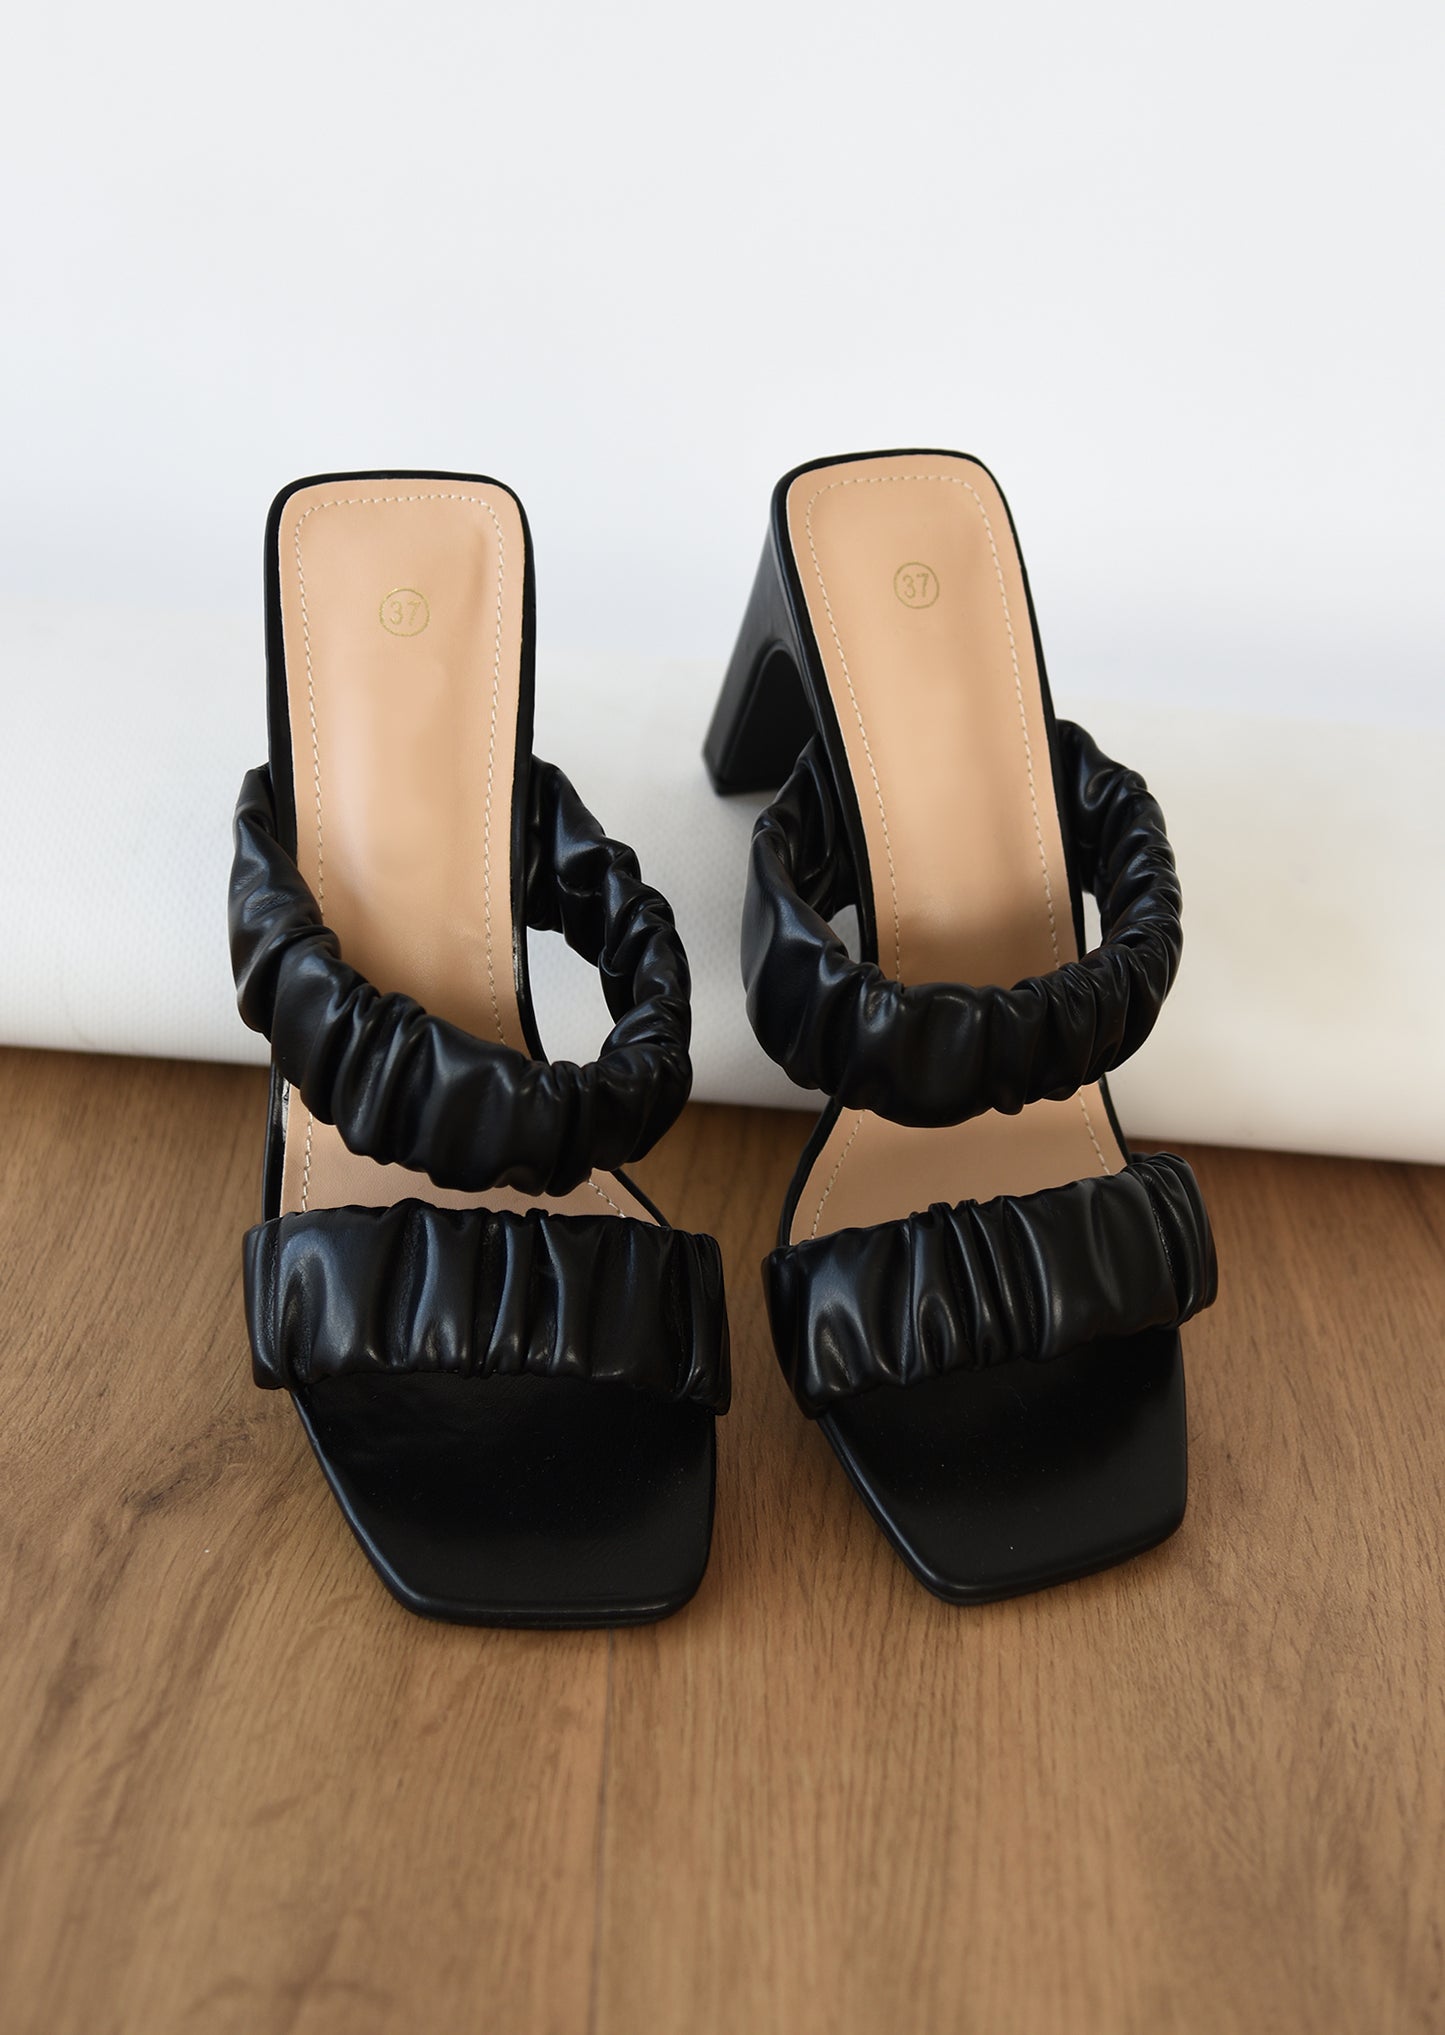 Square toe ruched heeled mules in black